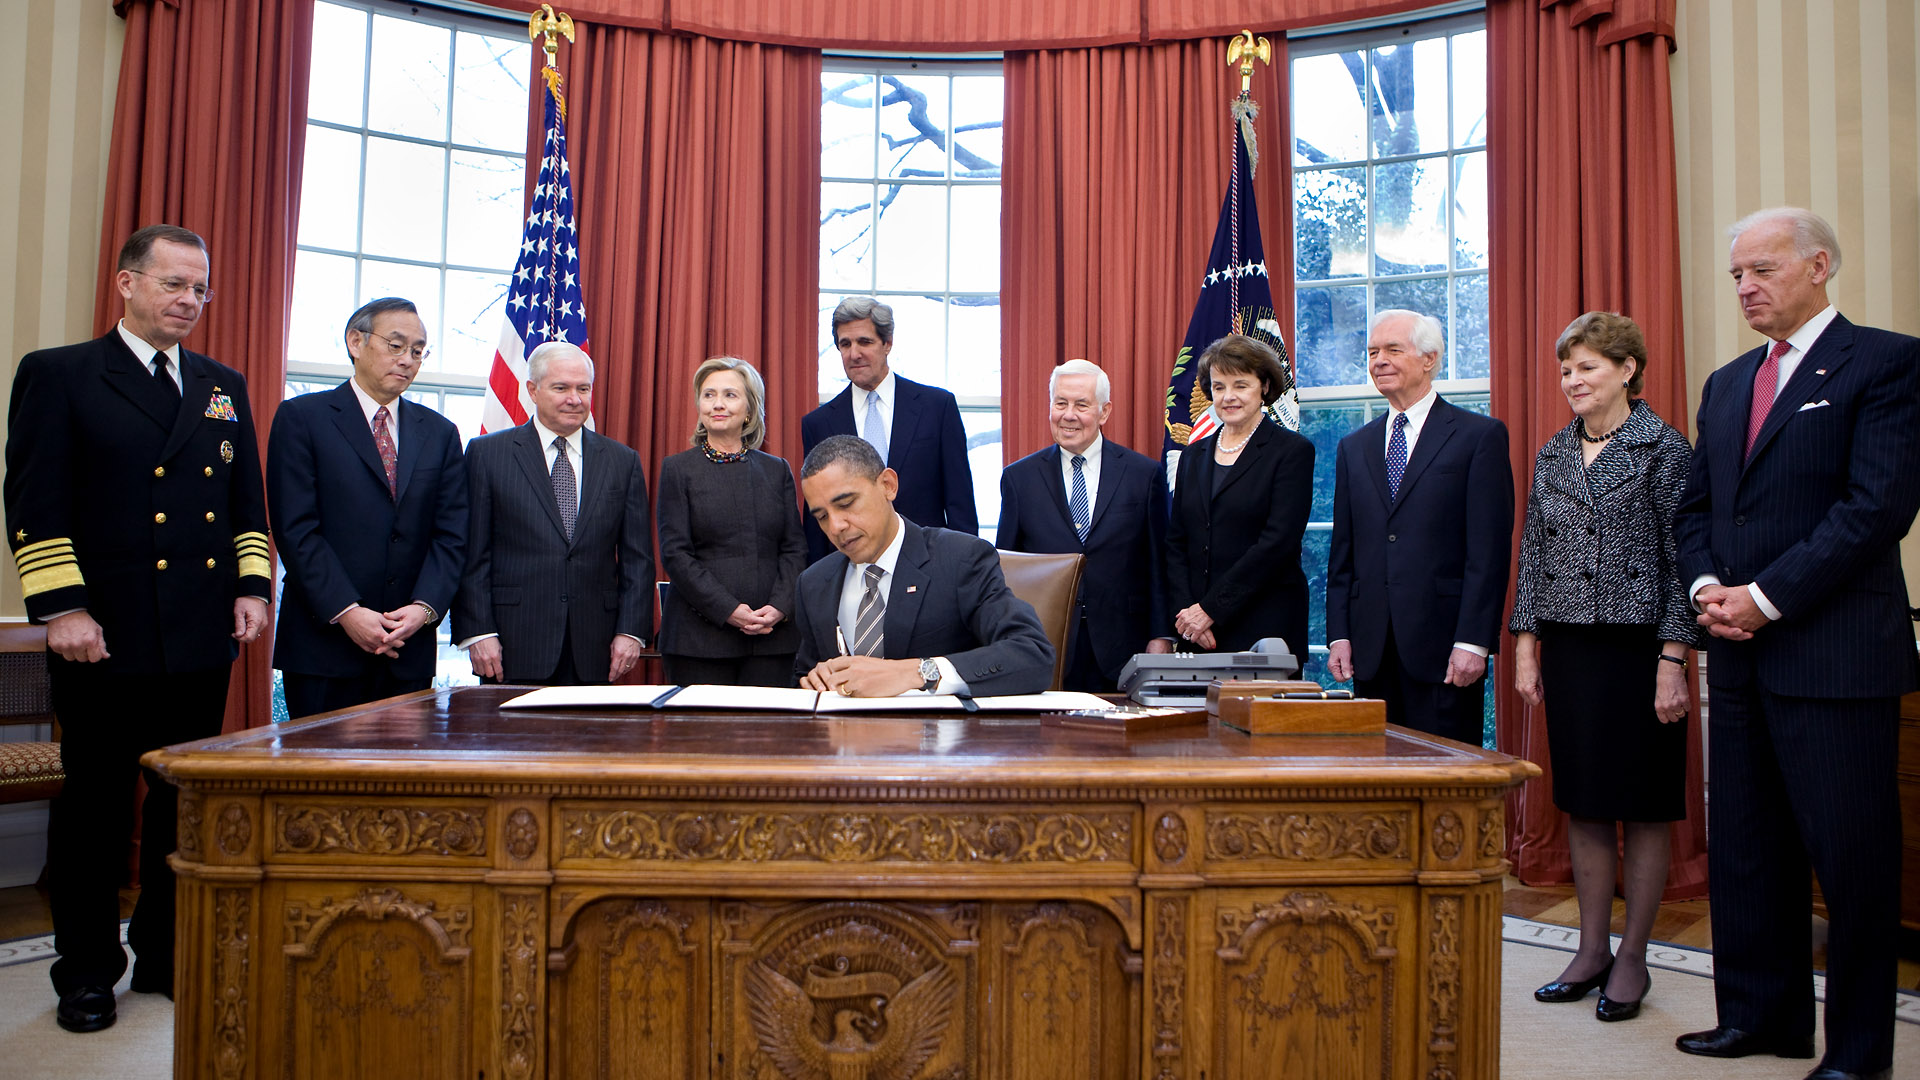 President Barack Obama signed the instrument of ratification of the New START Treaty in the Oval Office, February 2, 2011. Participants included then-Vice President Joe Biden. Source: Official White House Photo by Chuck Kennedy)